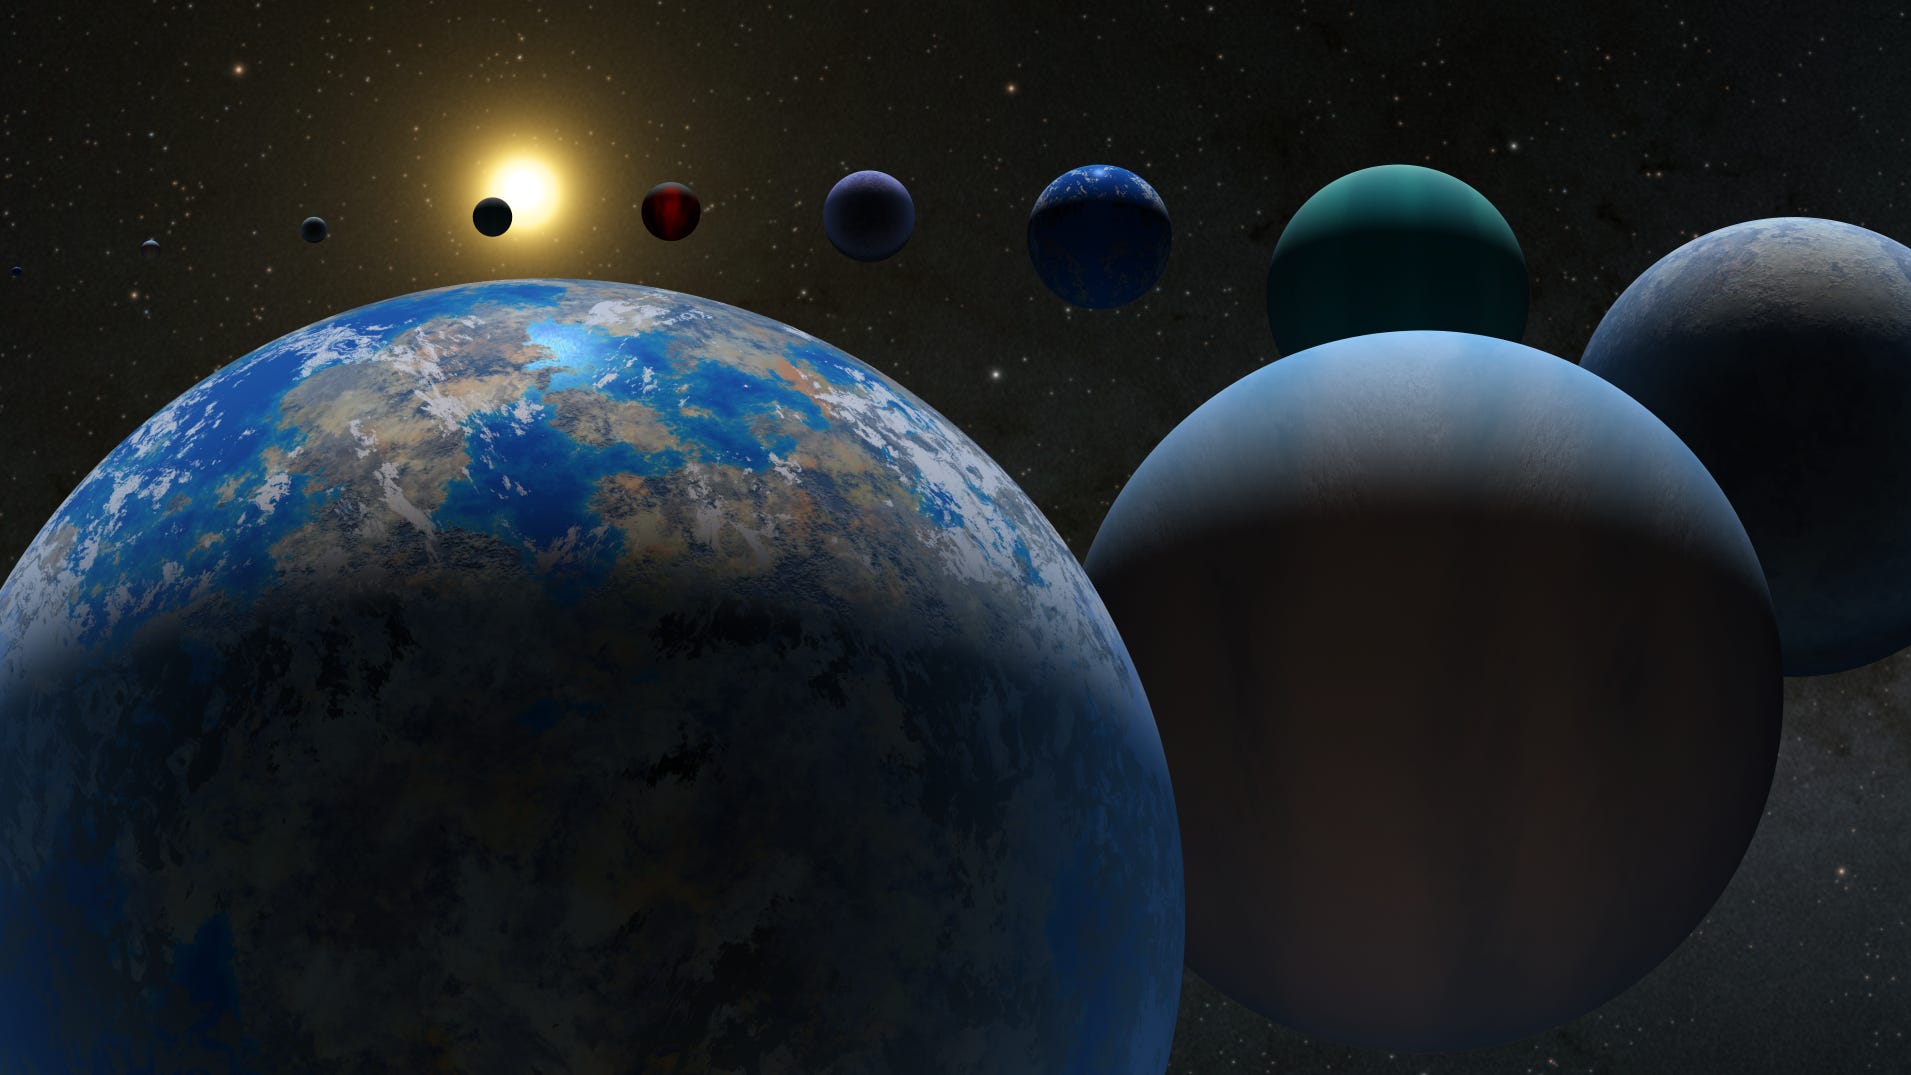 Super-Earths' 100 found, may suitable for life